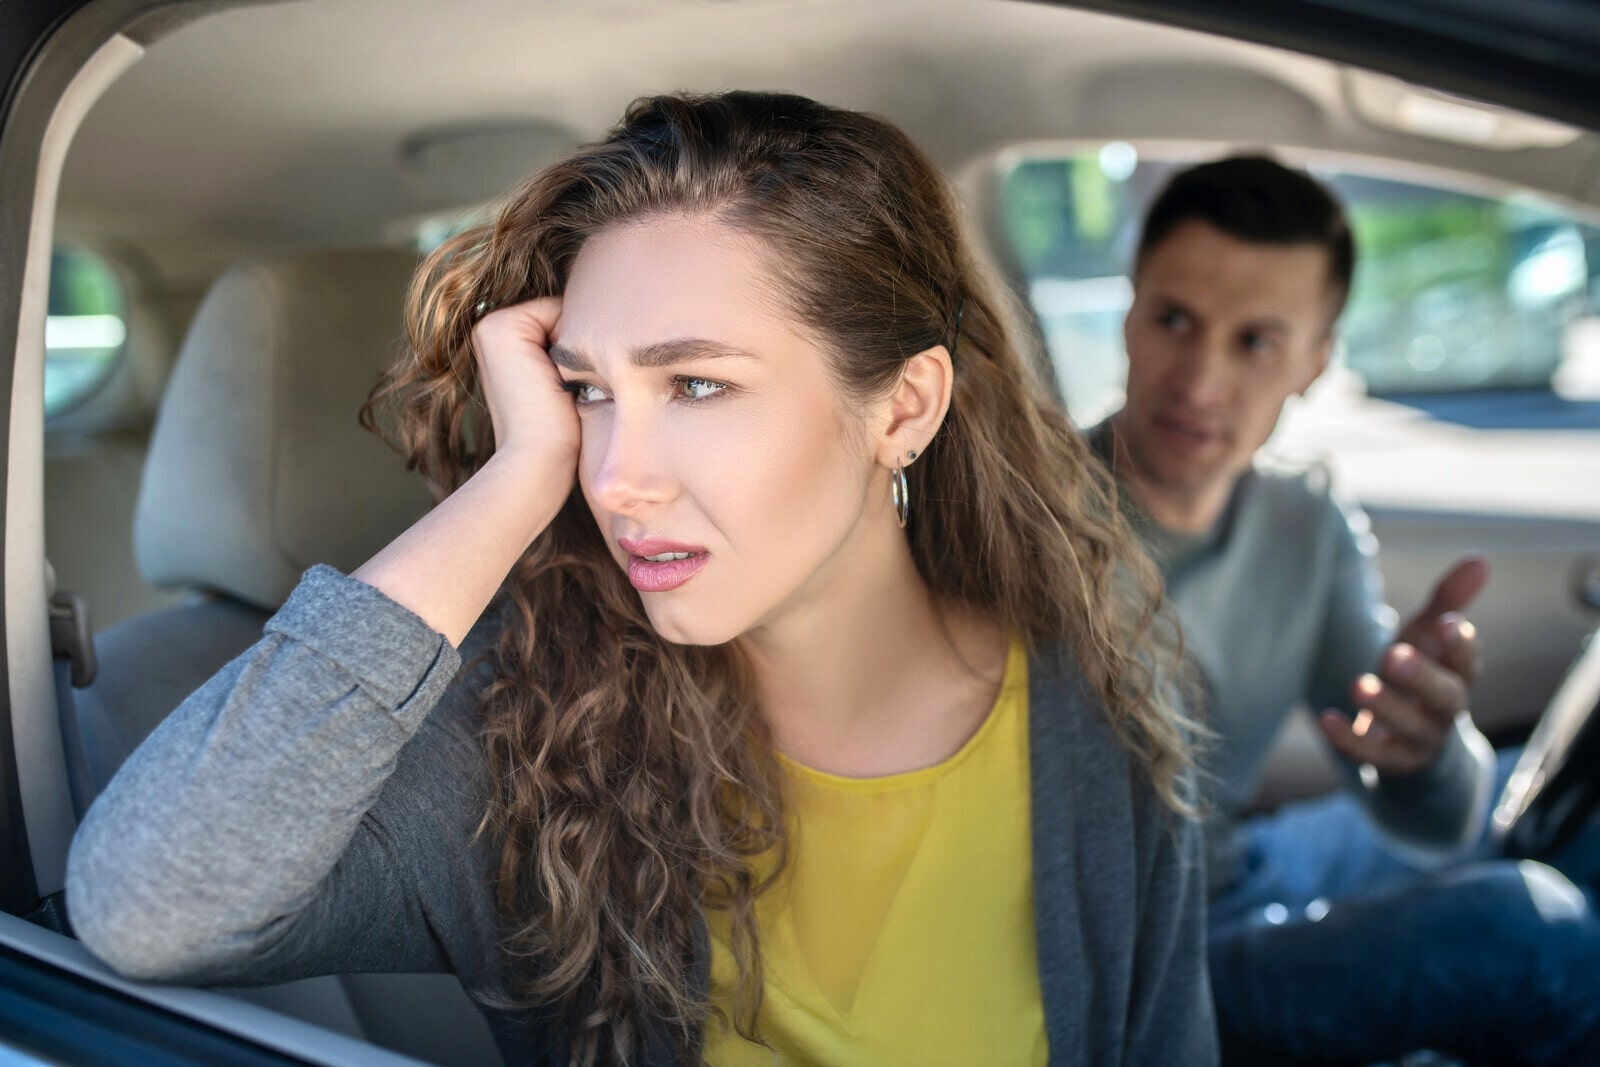 upset woman looking away from man while they sit in the car